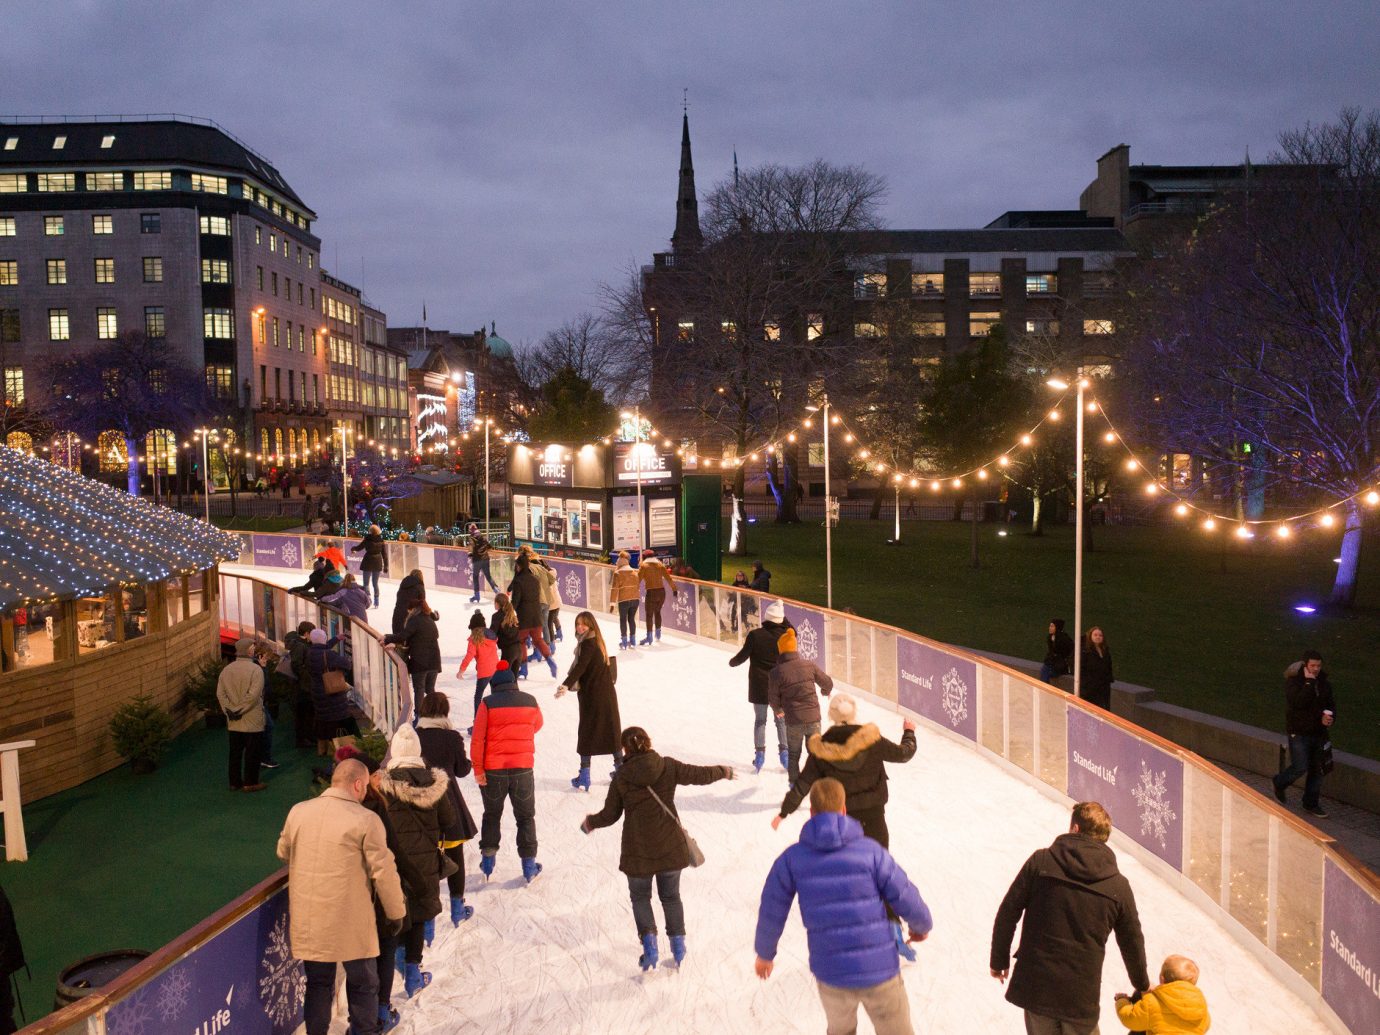 Trip Ideas outdoor person crowd City night rink ice rink town square evening tourism plaza cityscape line